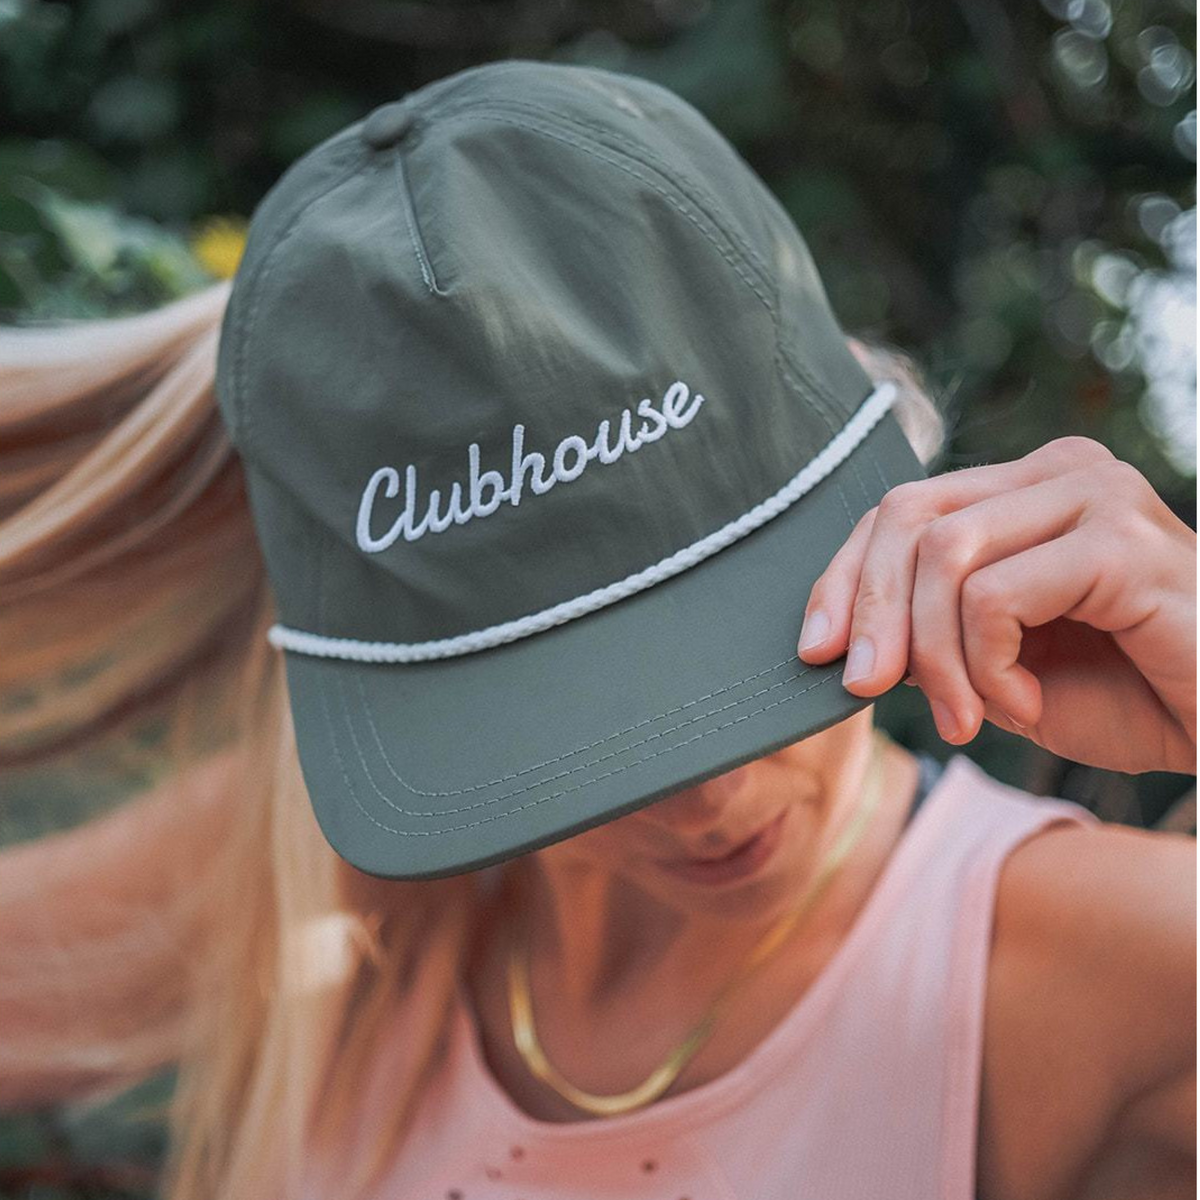 Cordially Clubhouse Cap - Olive